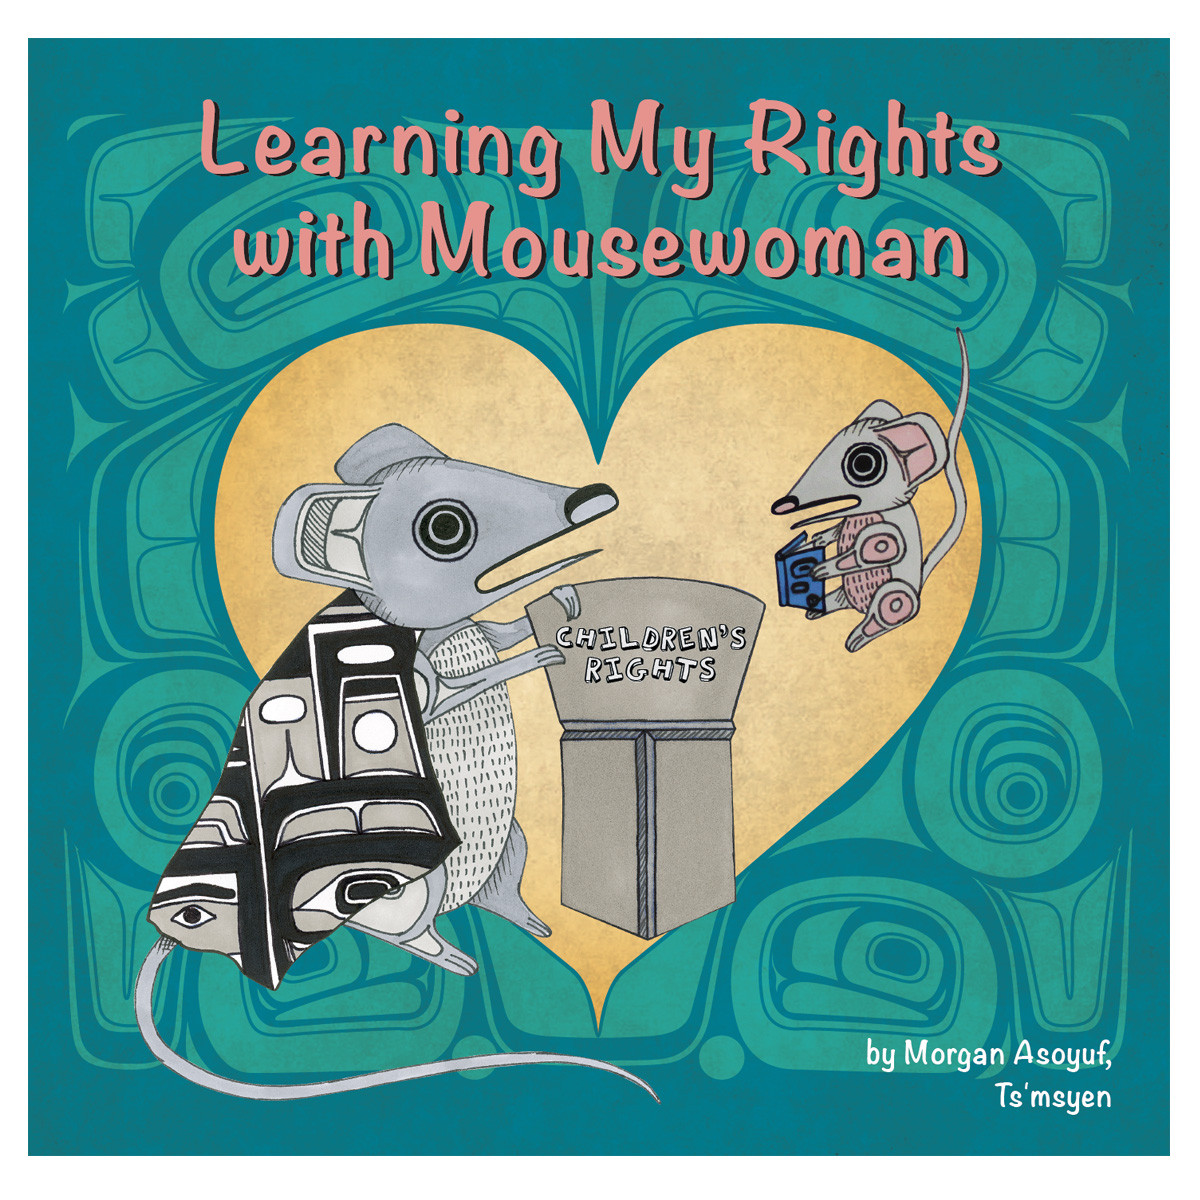 Learning My Rights with Mousewoman - Morgan Asoyuf Tsimshian